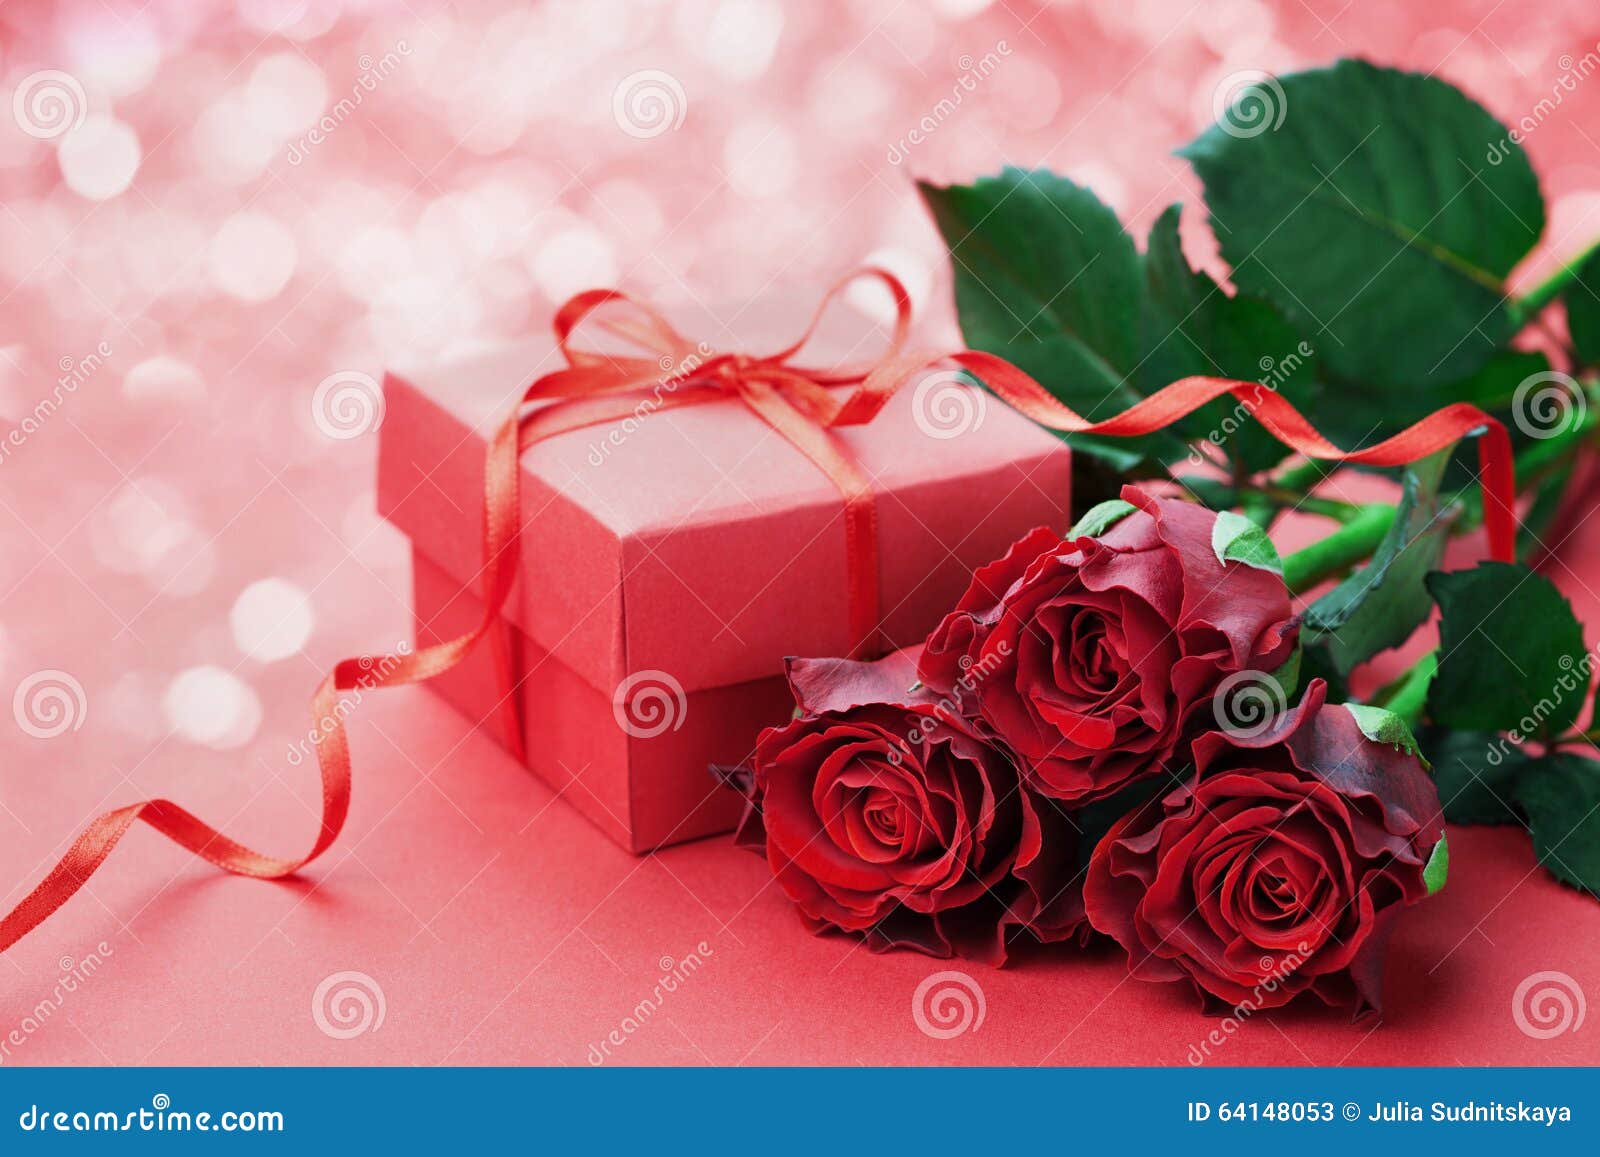 gift-box-bow-ribbon-red-roses-flowers-ho